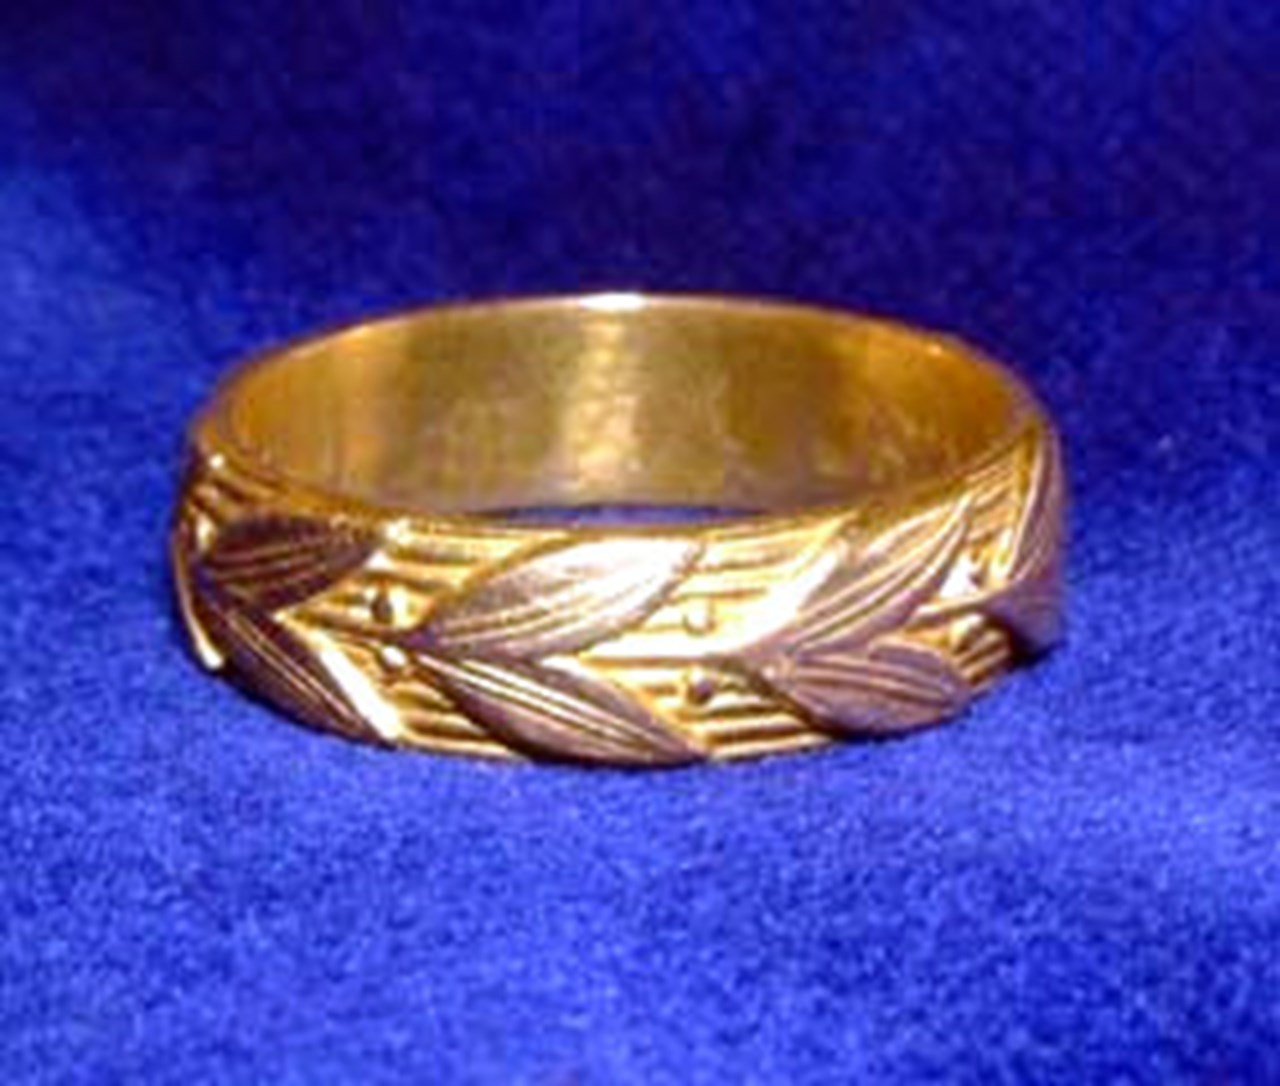 Photo of a doctoral ring.